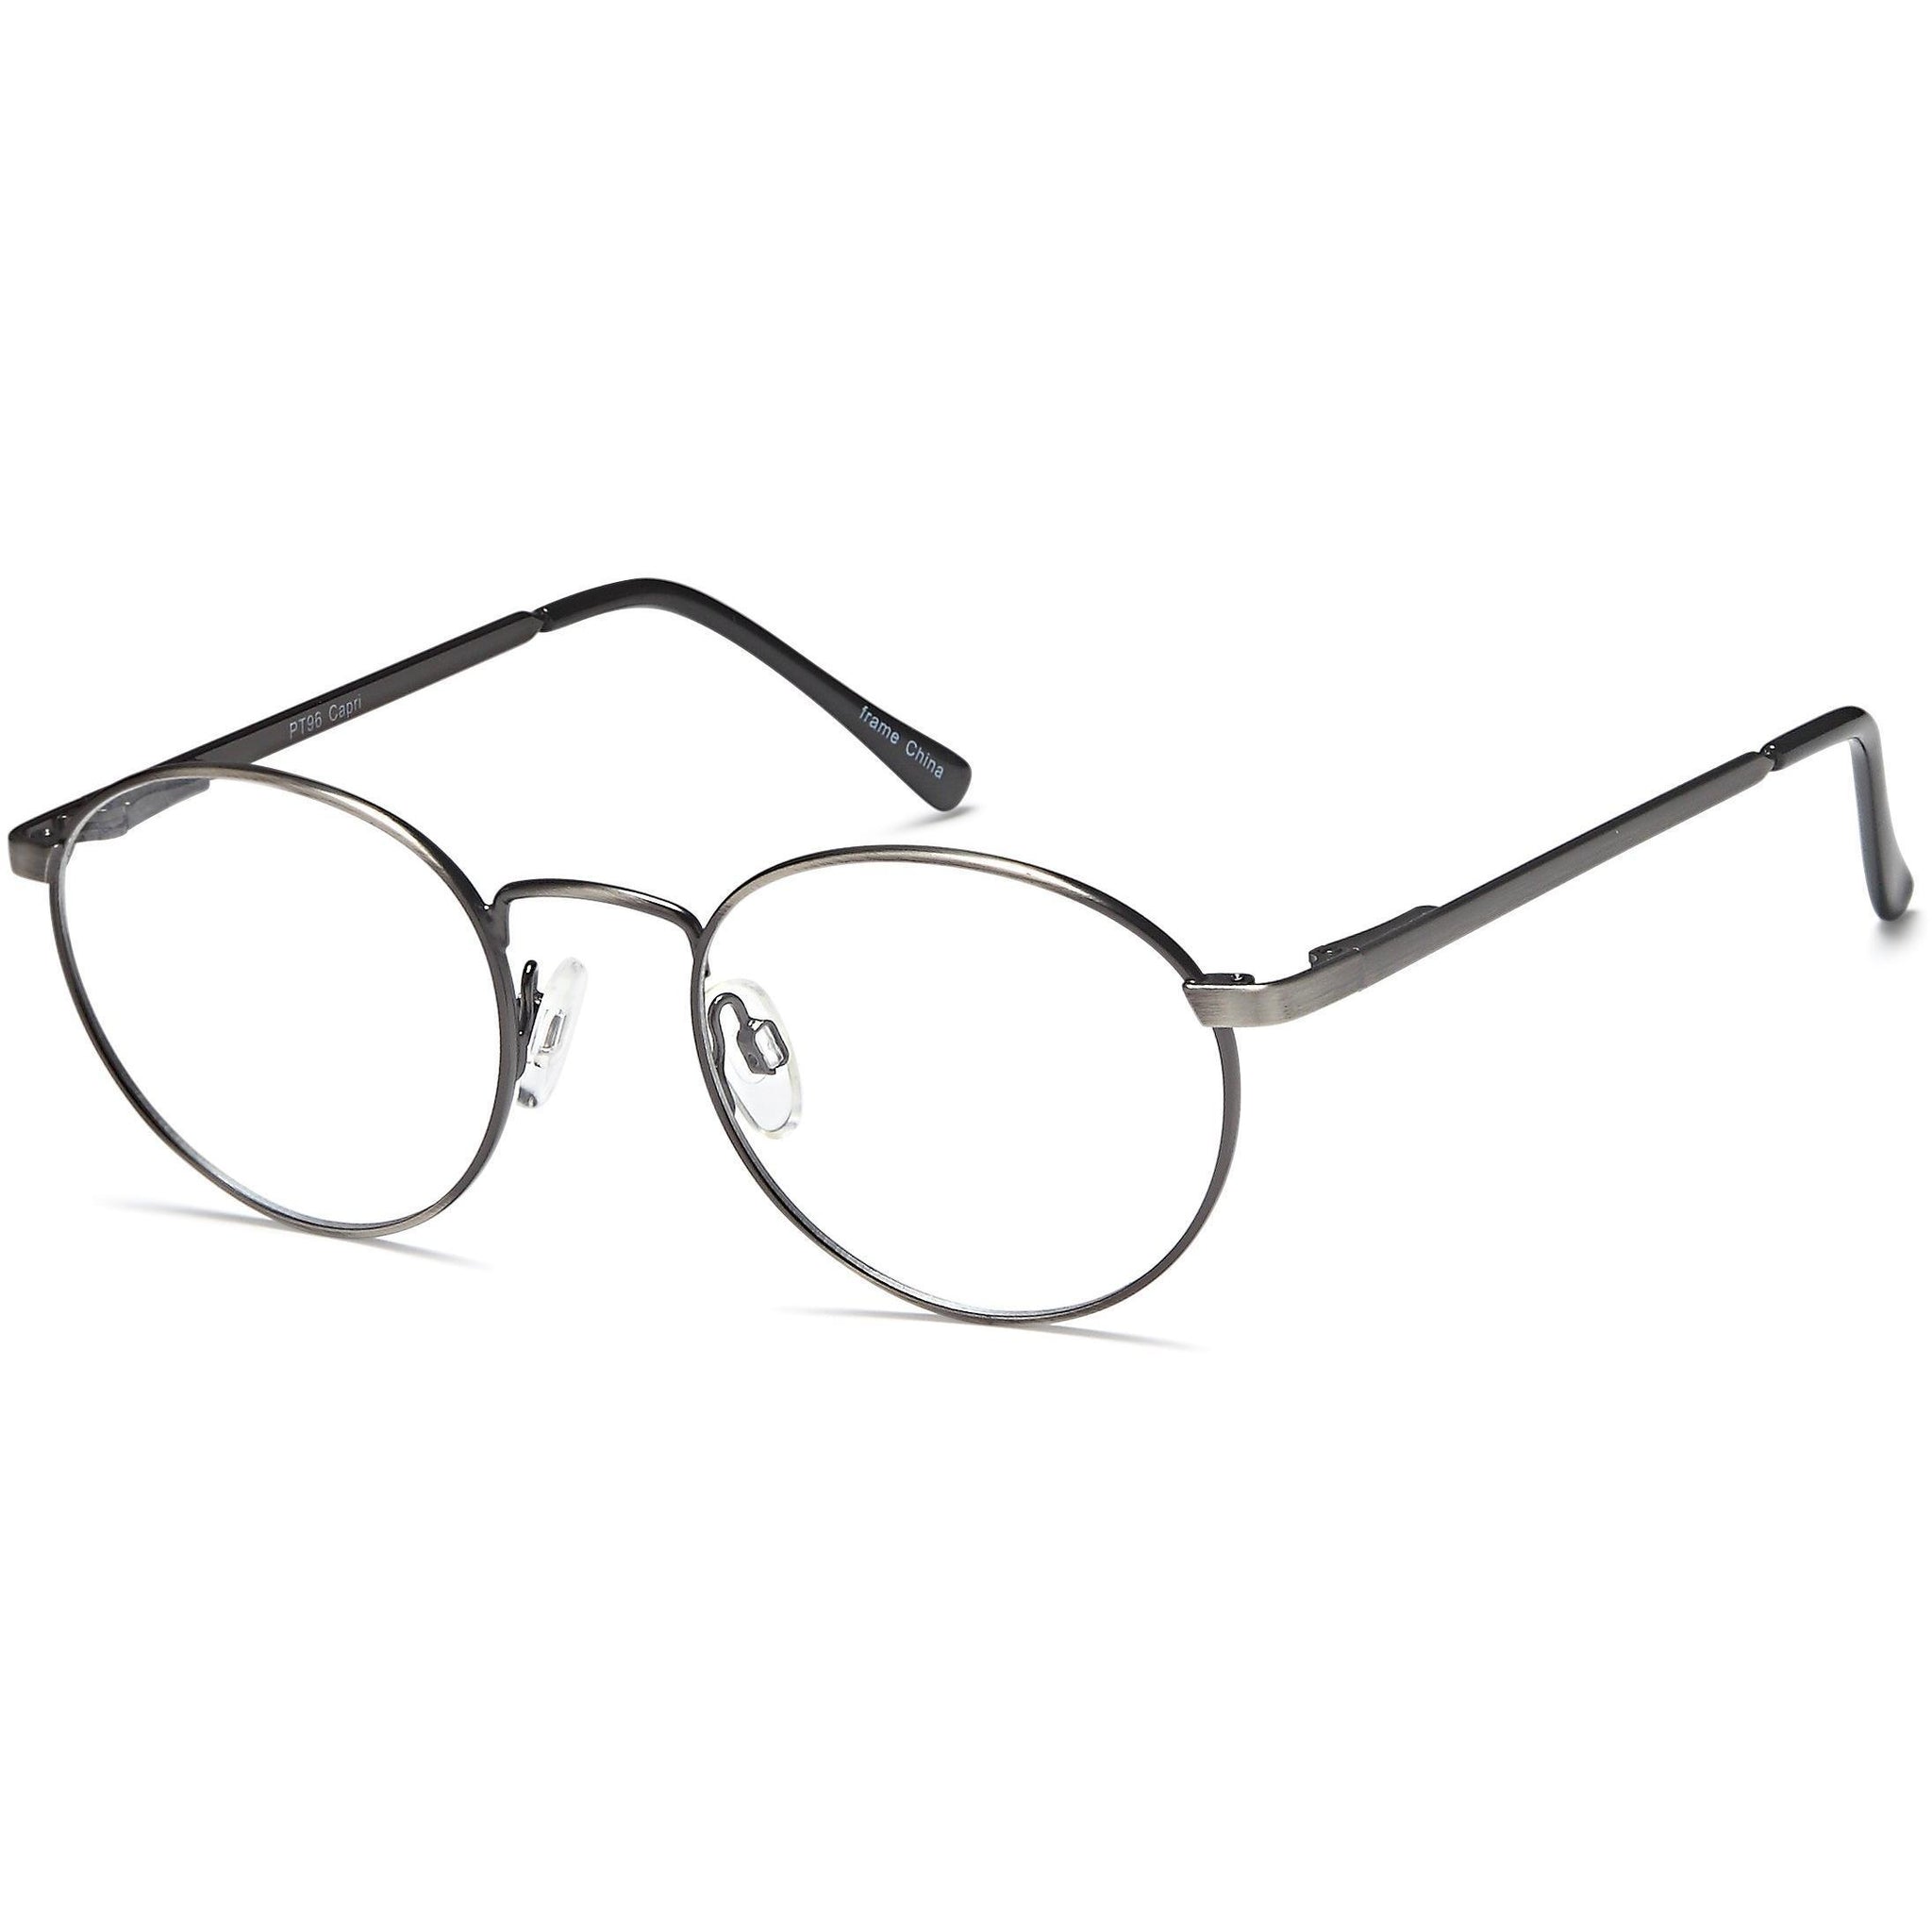 Harry by The Square Mile Round Juniors Optical Glasses - timetoshade